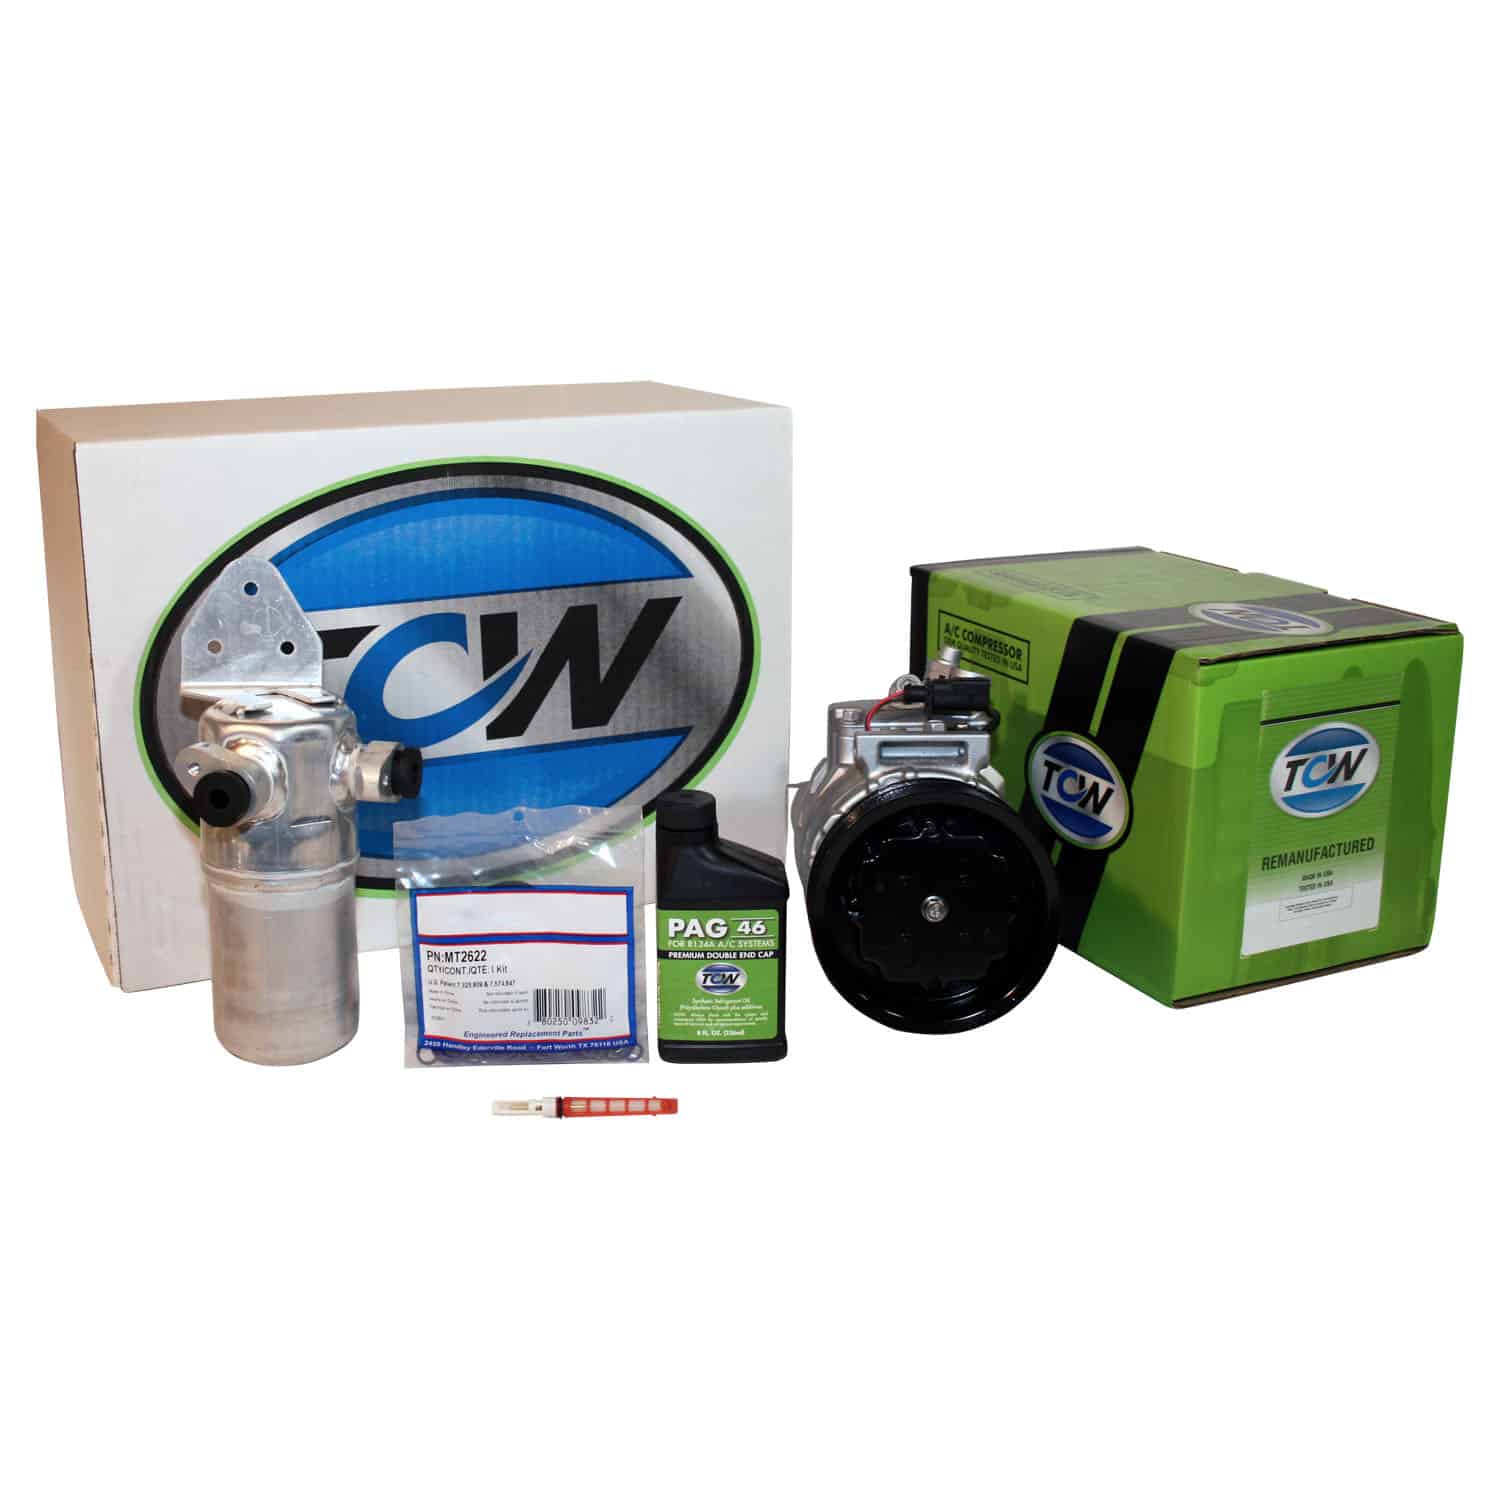 TCW Vehicle A/C Kit K1000425R Remanufactured Product Image field_60b6a13a6e67c